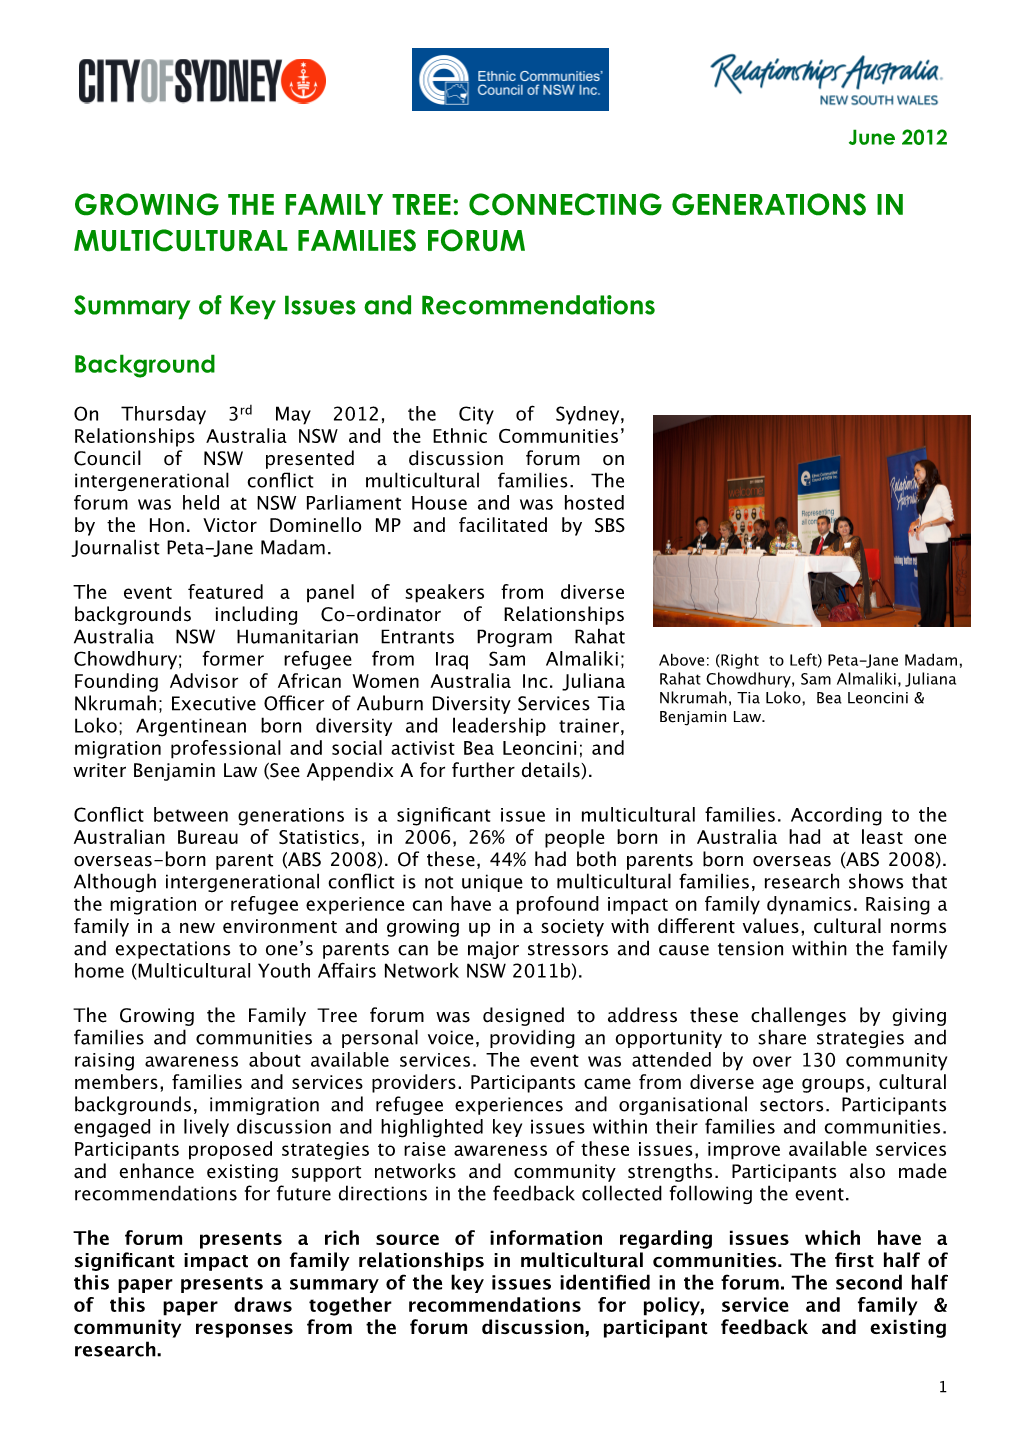 Growing the Family Tree: Connecting Generations in Multicultural Families Forum